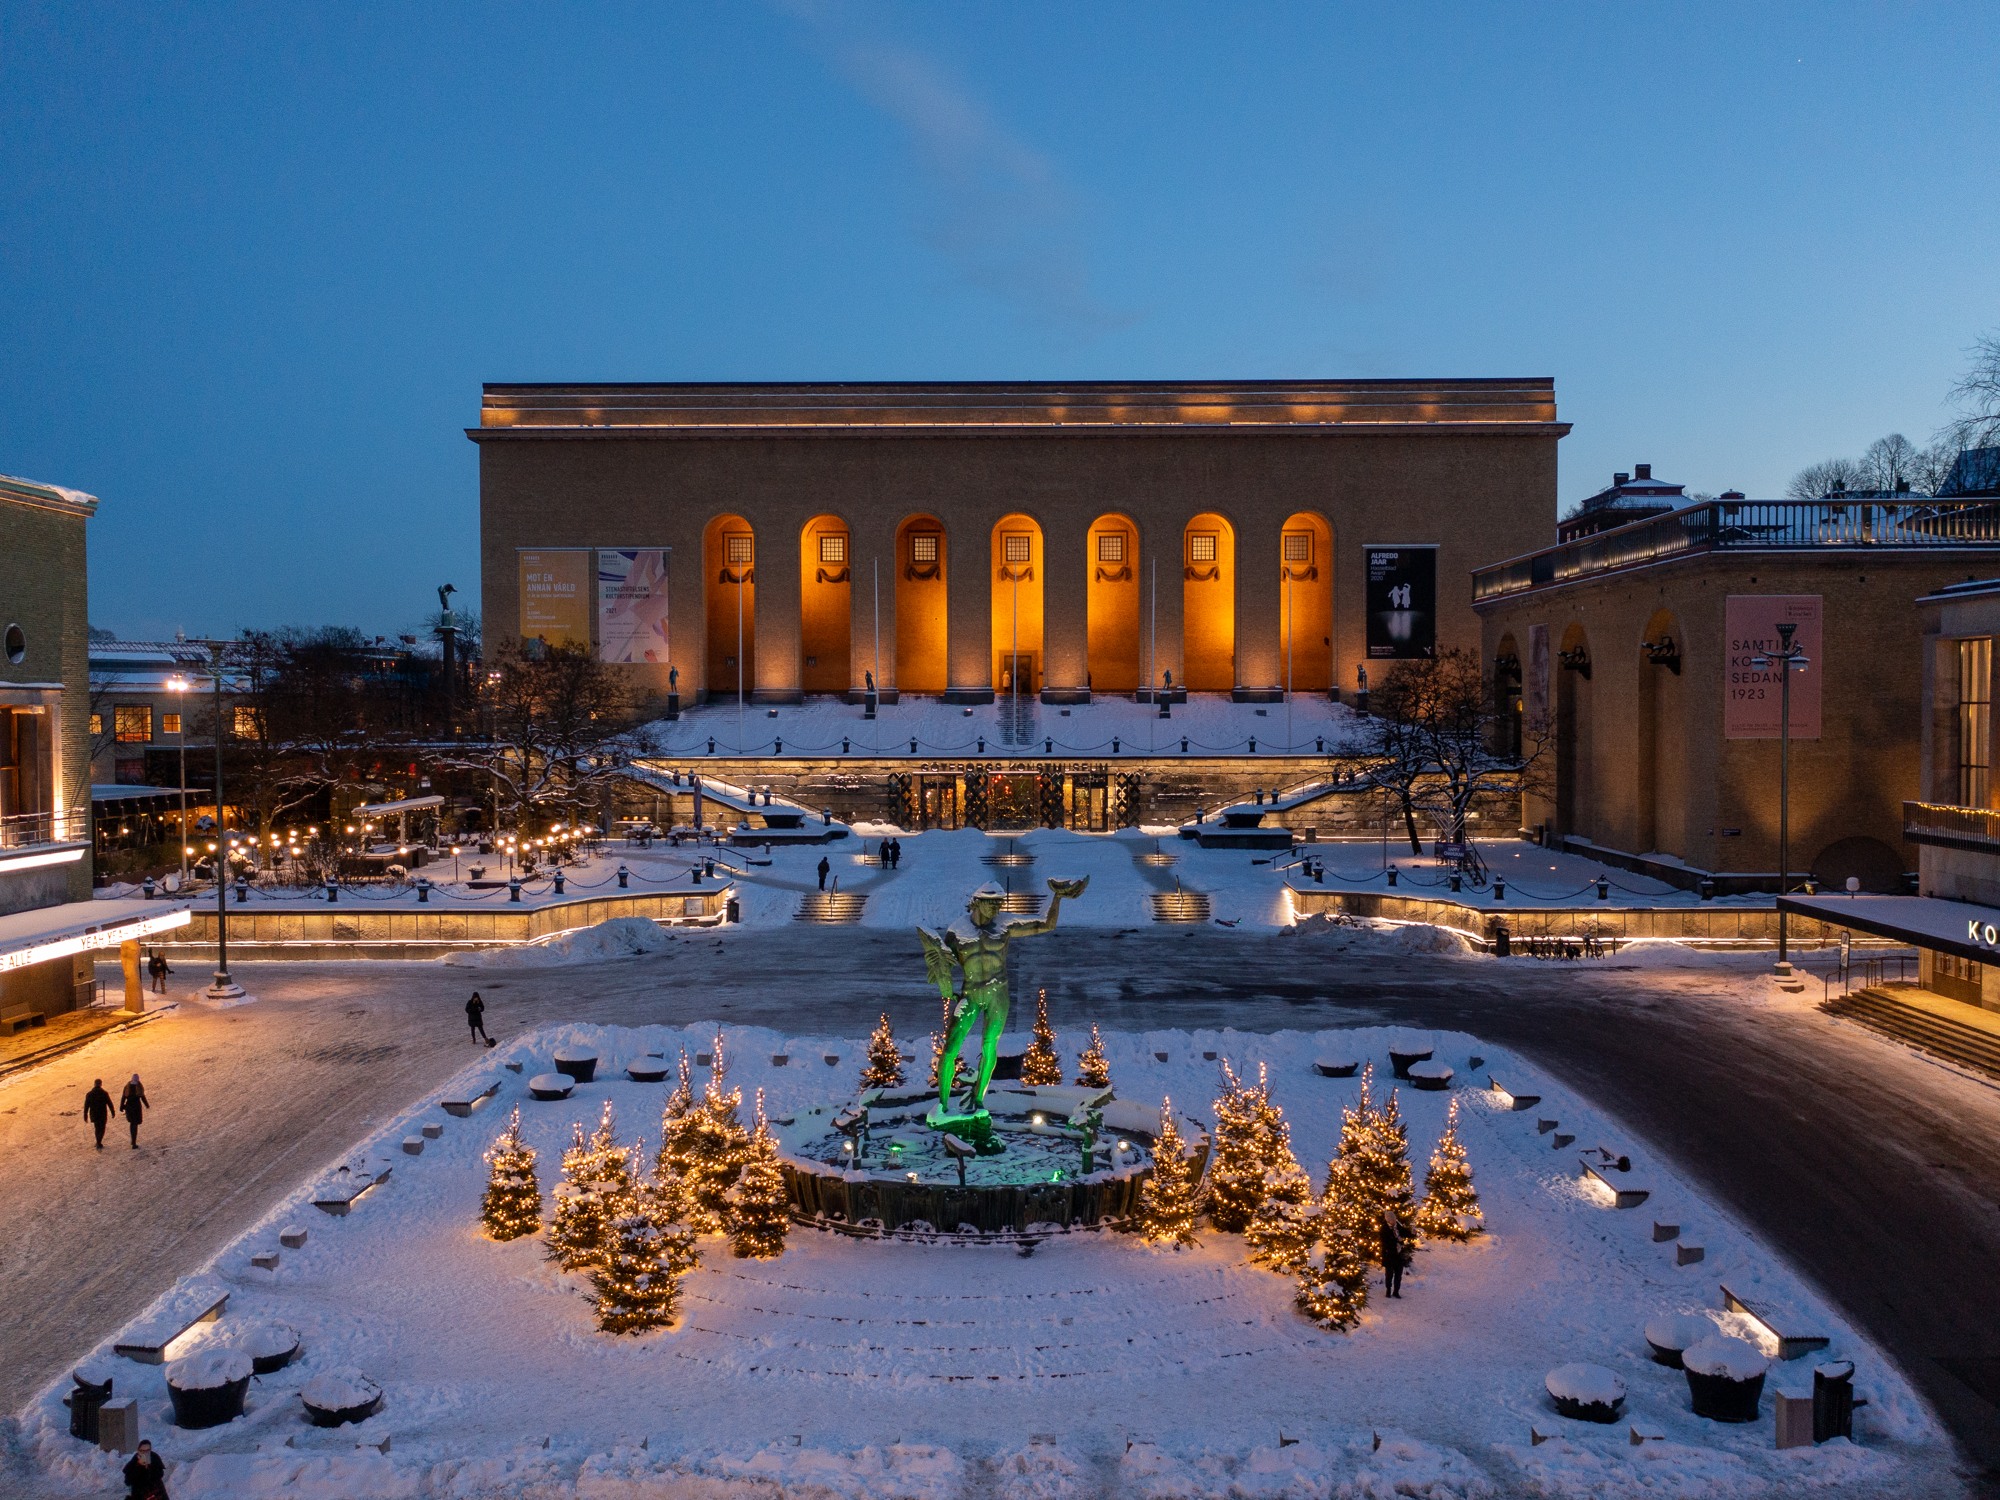 View of a snowy square with the statue of Poseidon in the middle, surrounded by lit pine trees, and the Göteborgs konsthall - the centre for contemporary art in Gothenburg - in the background.